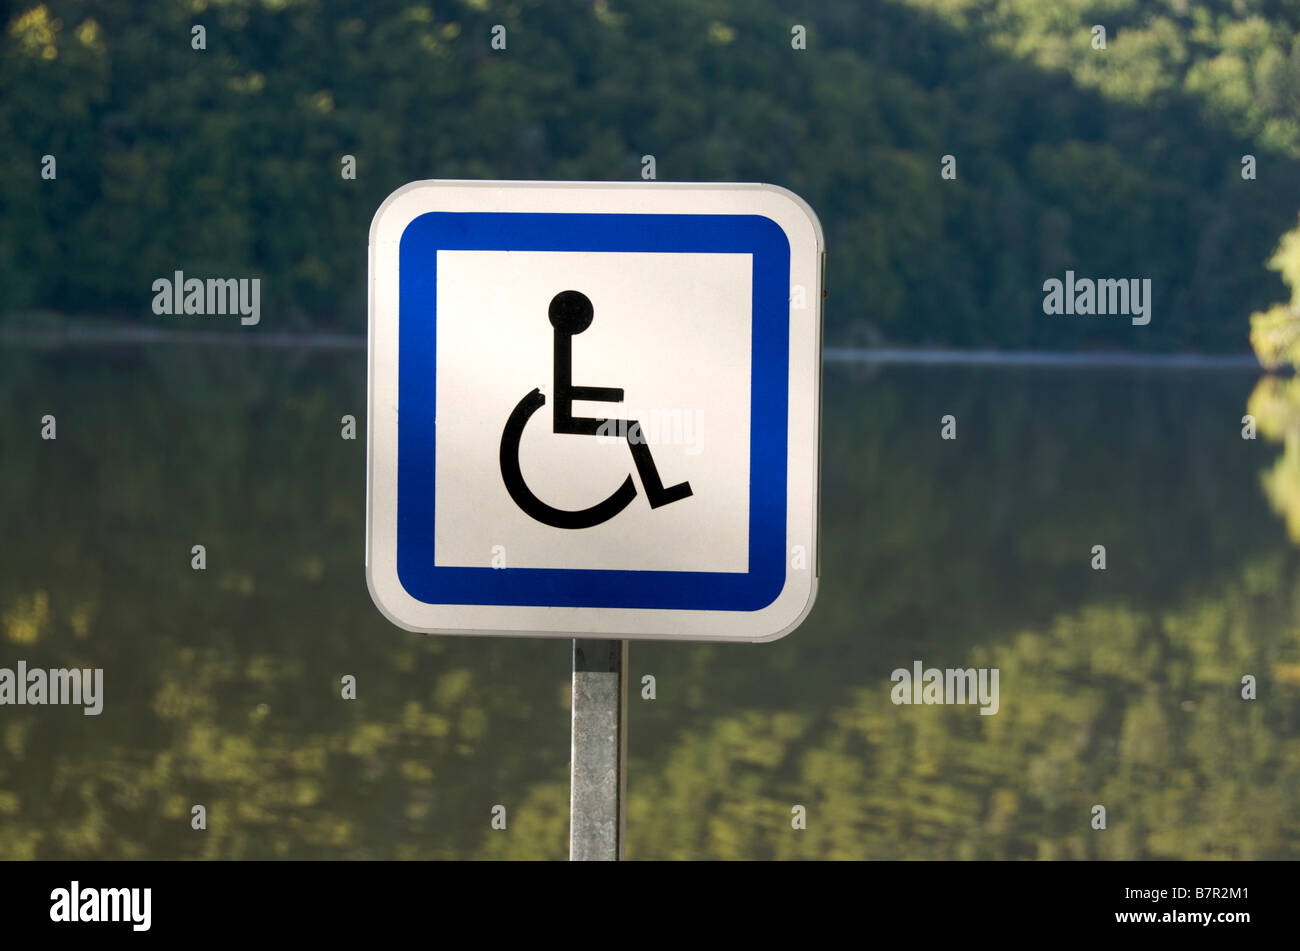 Disabled sign Stock Photo